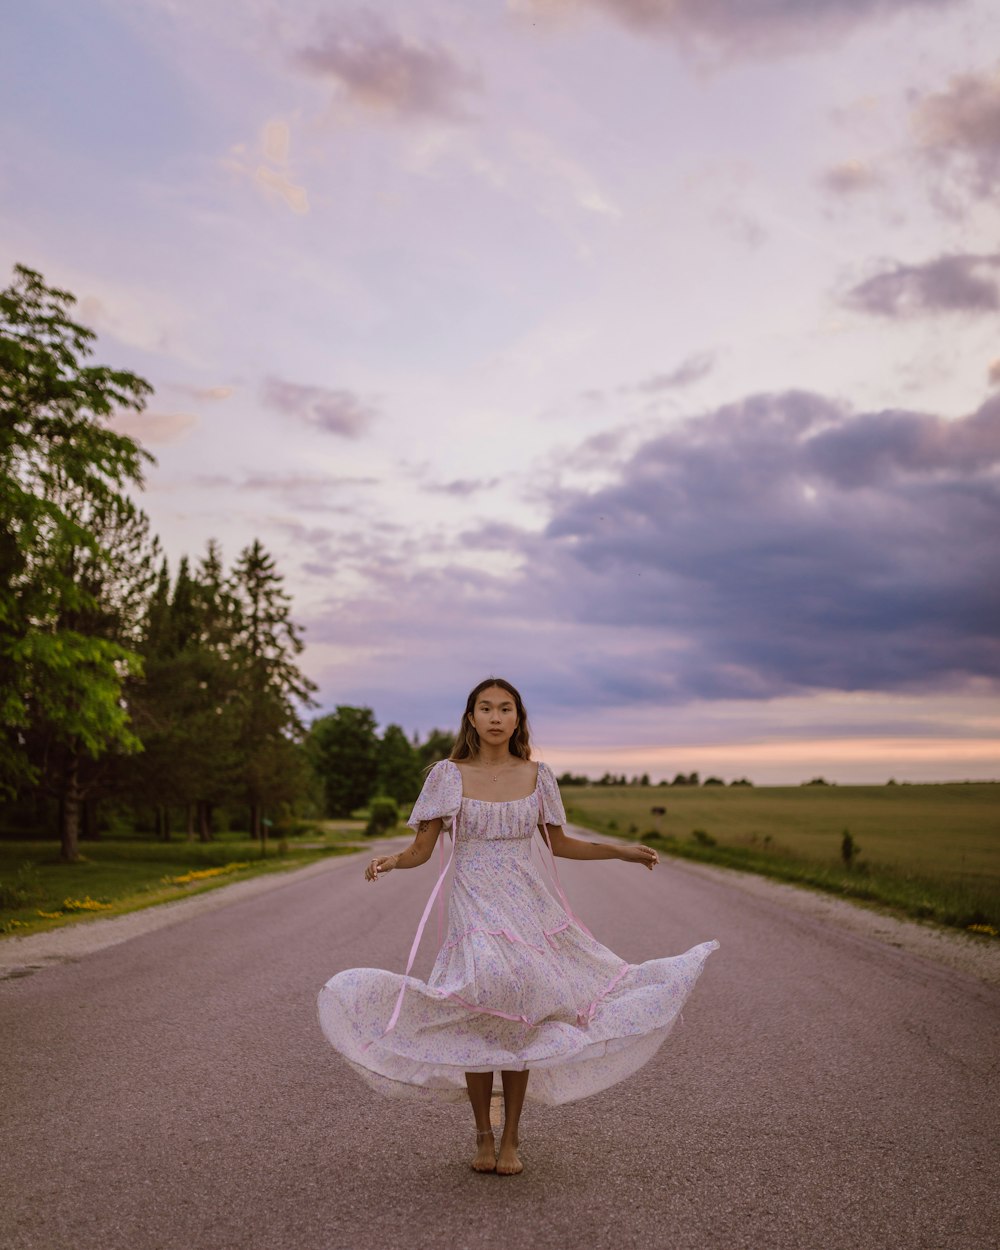 woman in white dress standing on road under gray clouds during daytime